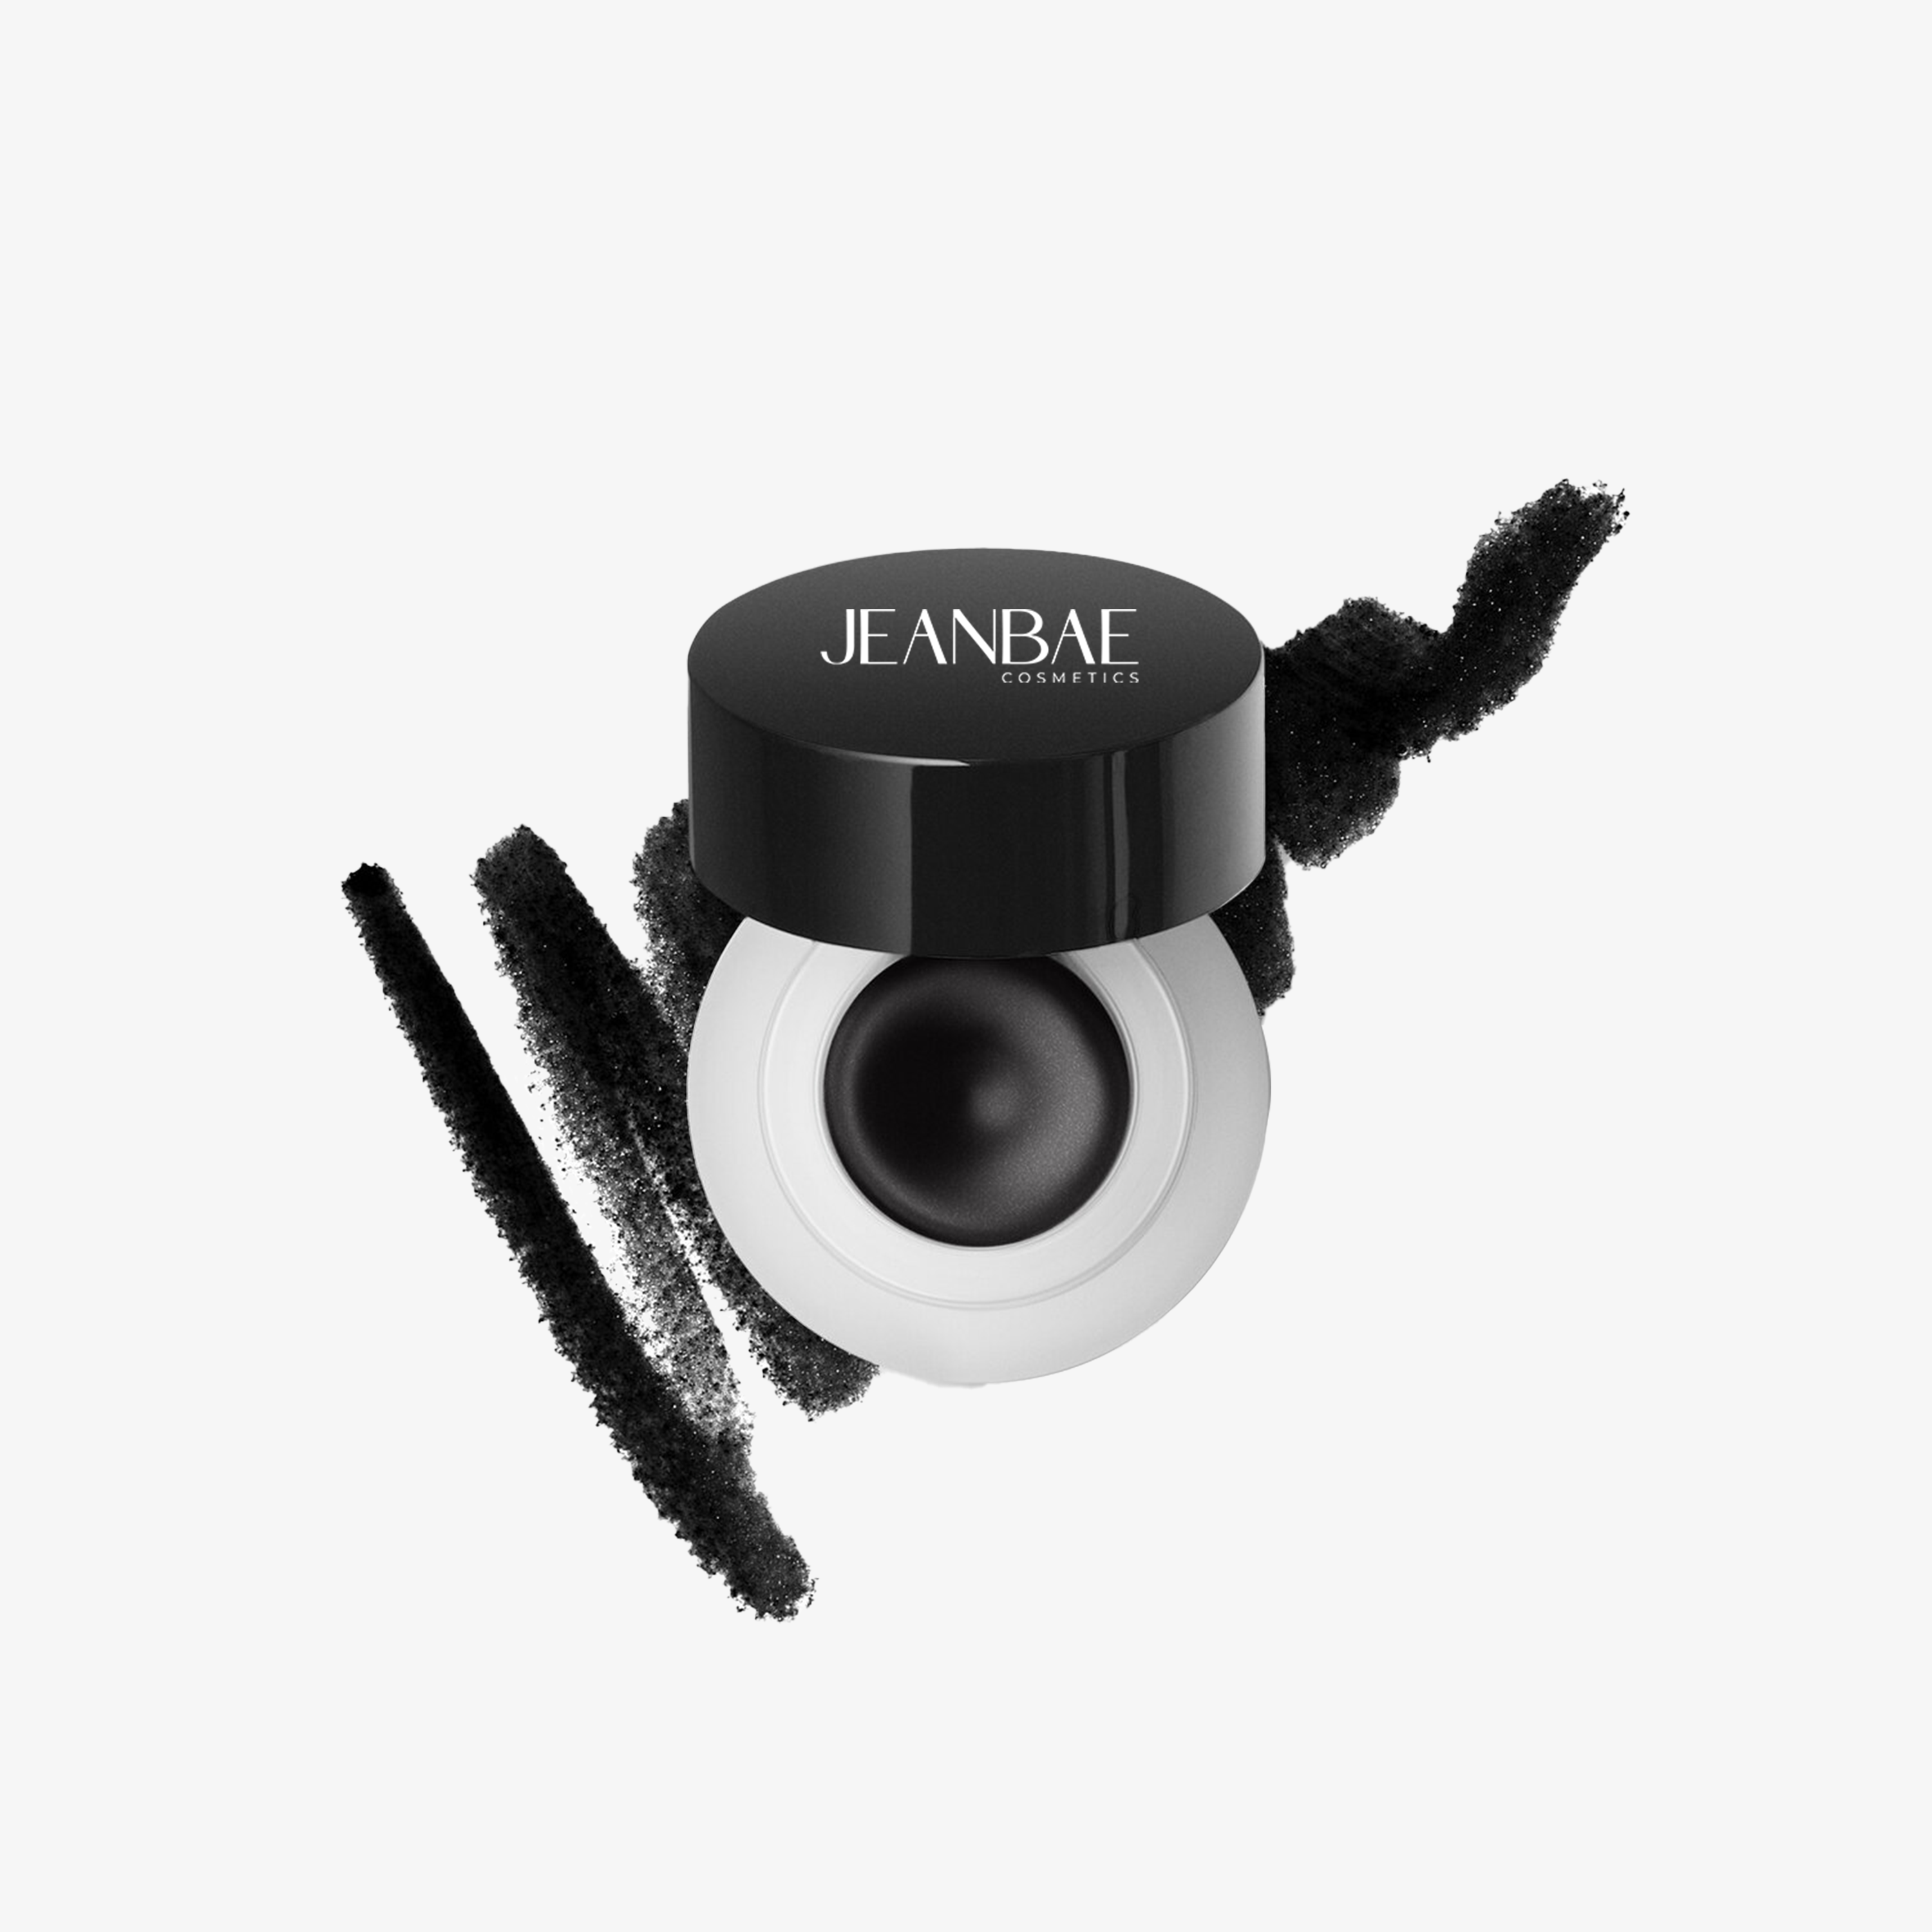 A deep black creamy formula that lines the eyes with precision or can be buffed out for a smudged smokey eye.  THIS PRODUCT IS Cruelty-Free and E.U. Registered. Free Of Parabens. 